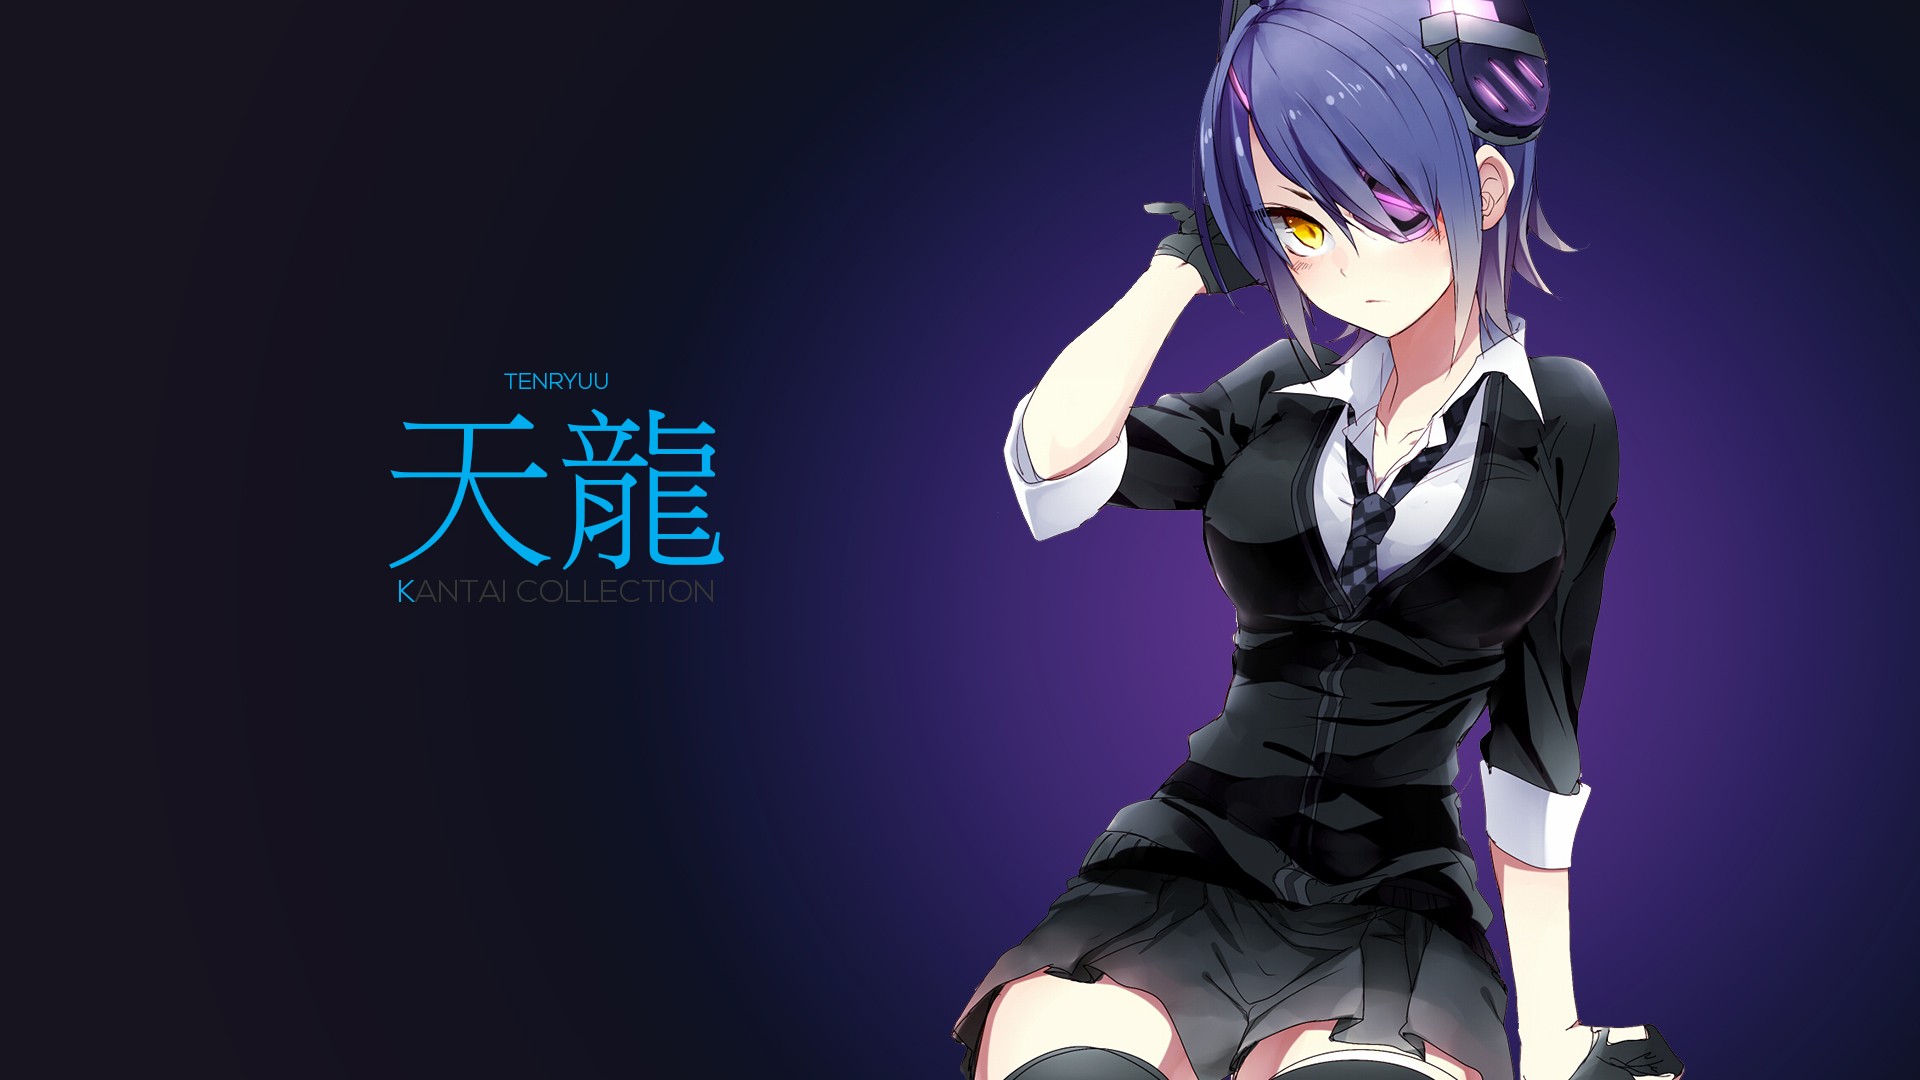 Tenryuu KanColle Kantai Collection Purple Background Japanese Characters Tie Anime 1920x1080